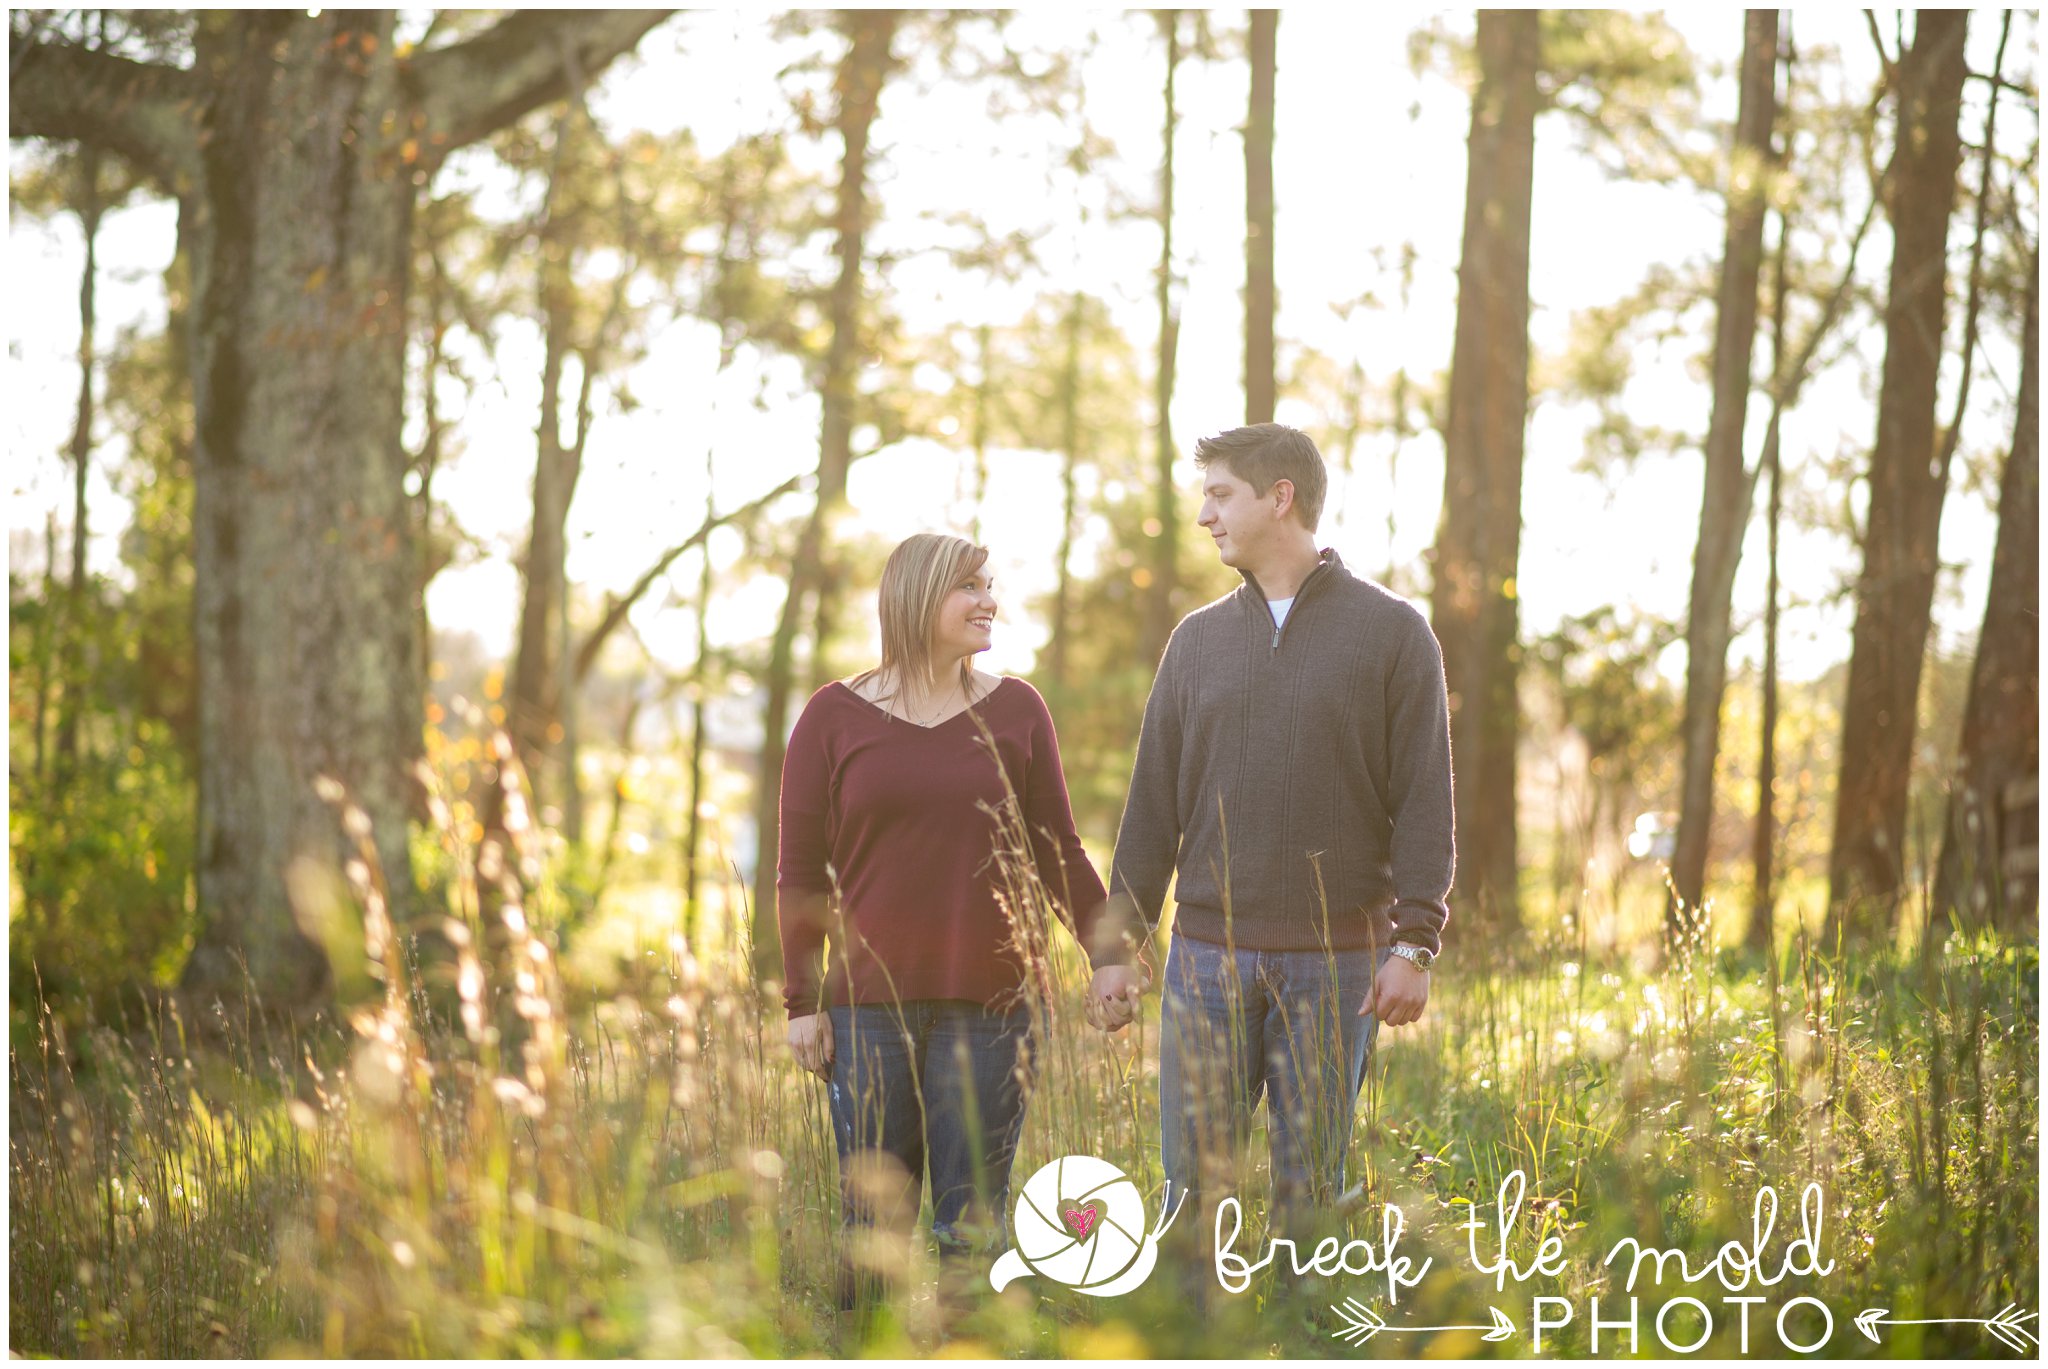 break-the-mold-photo-field-country-engagement-winter-shoot_6633.jpg